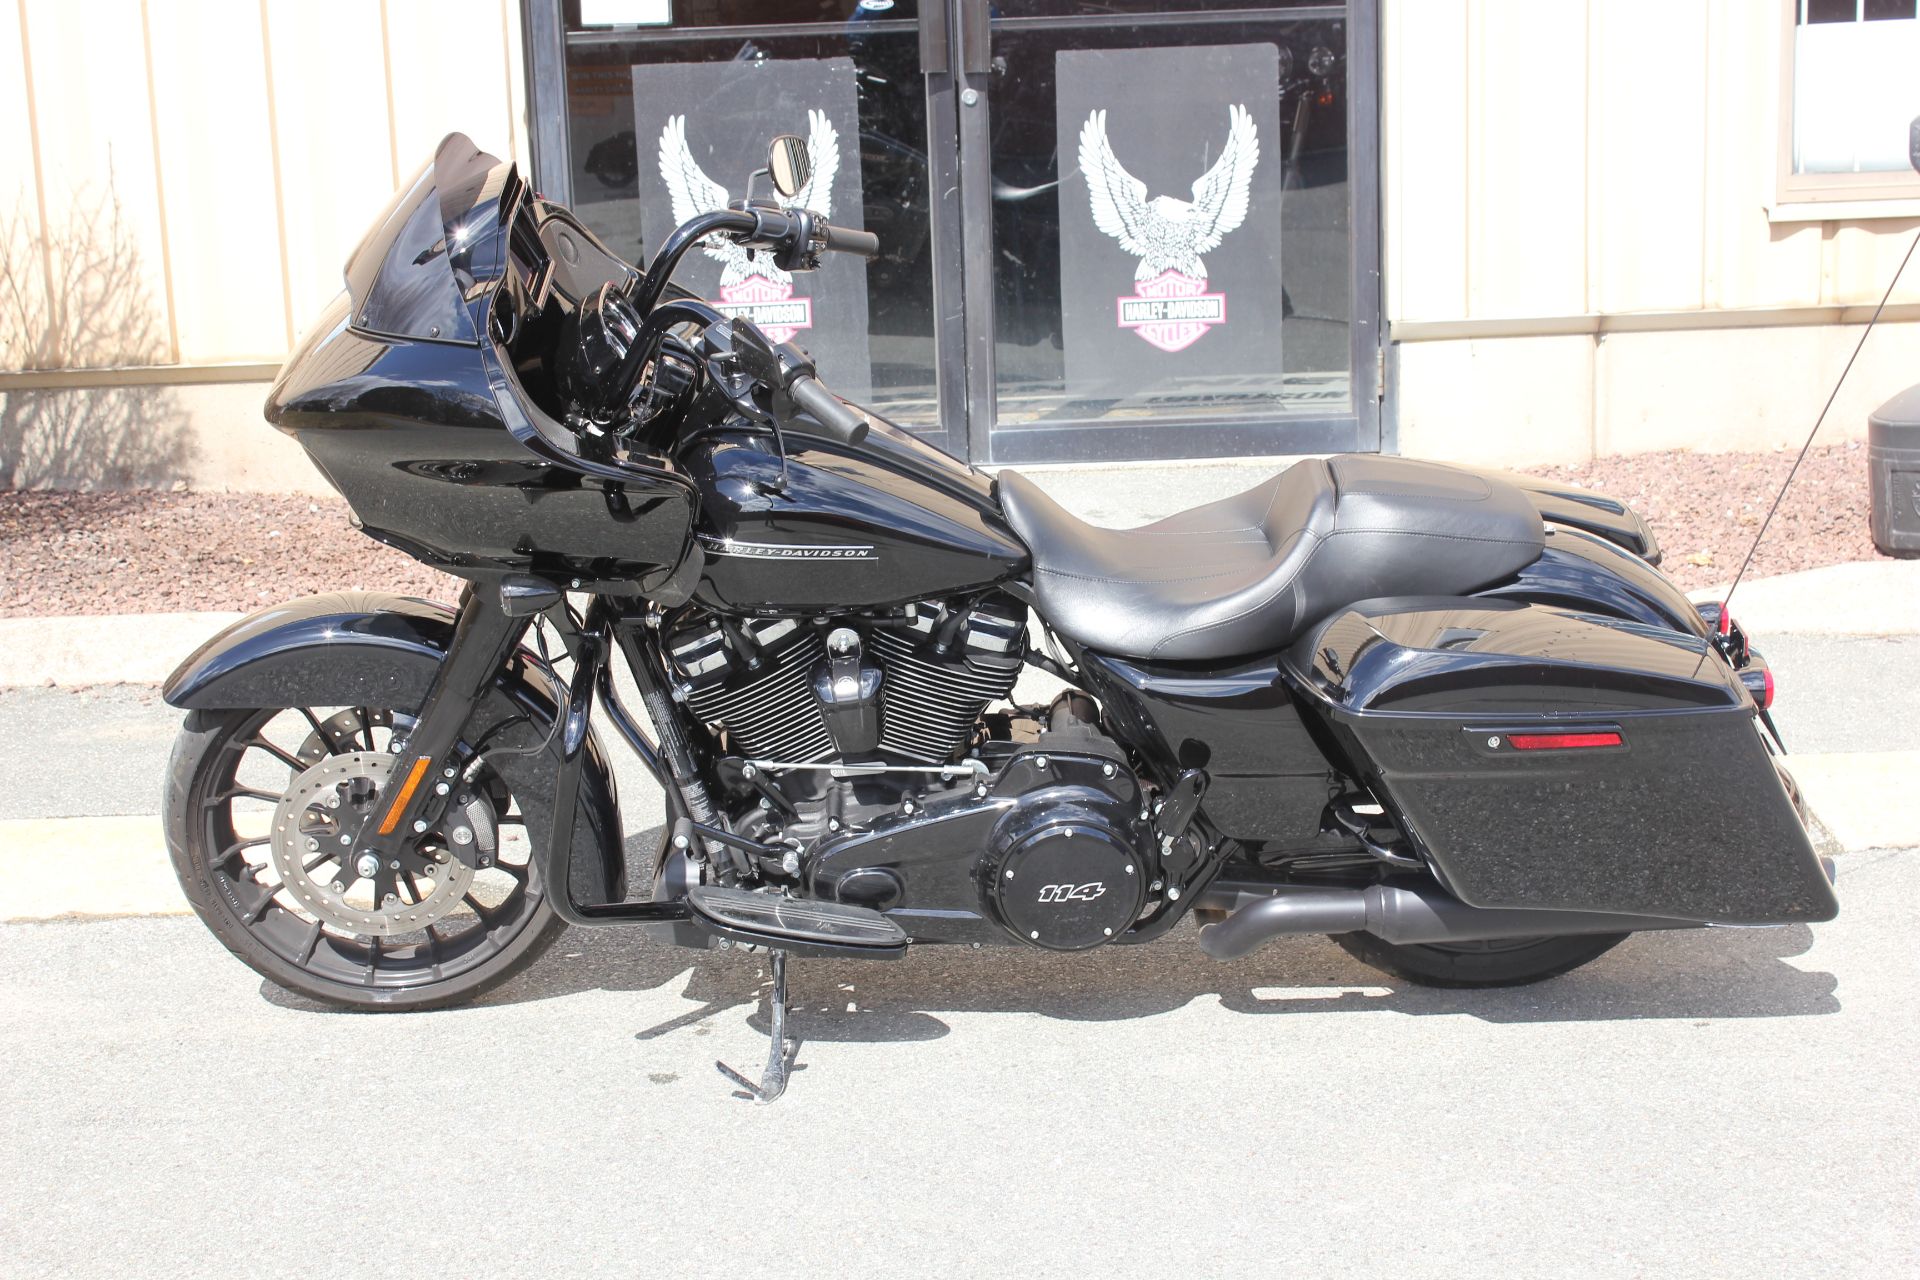 2019 Harley-Davidson ROAD GLIDE SPECIAL in Pittsfield, Massachusetts - Photo 1